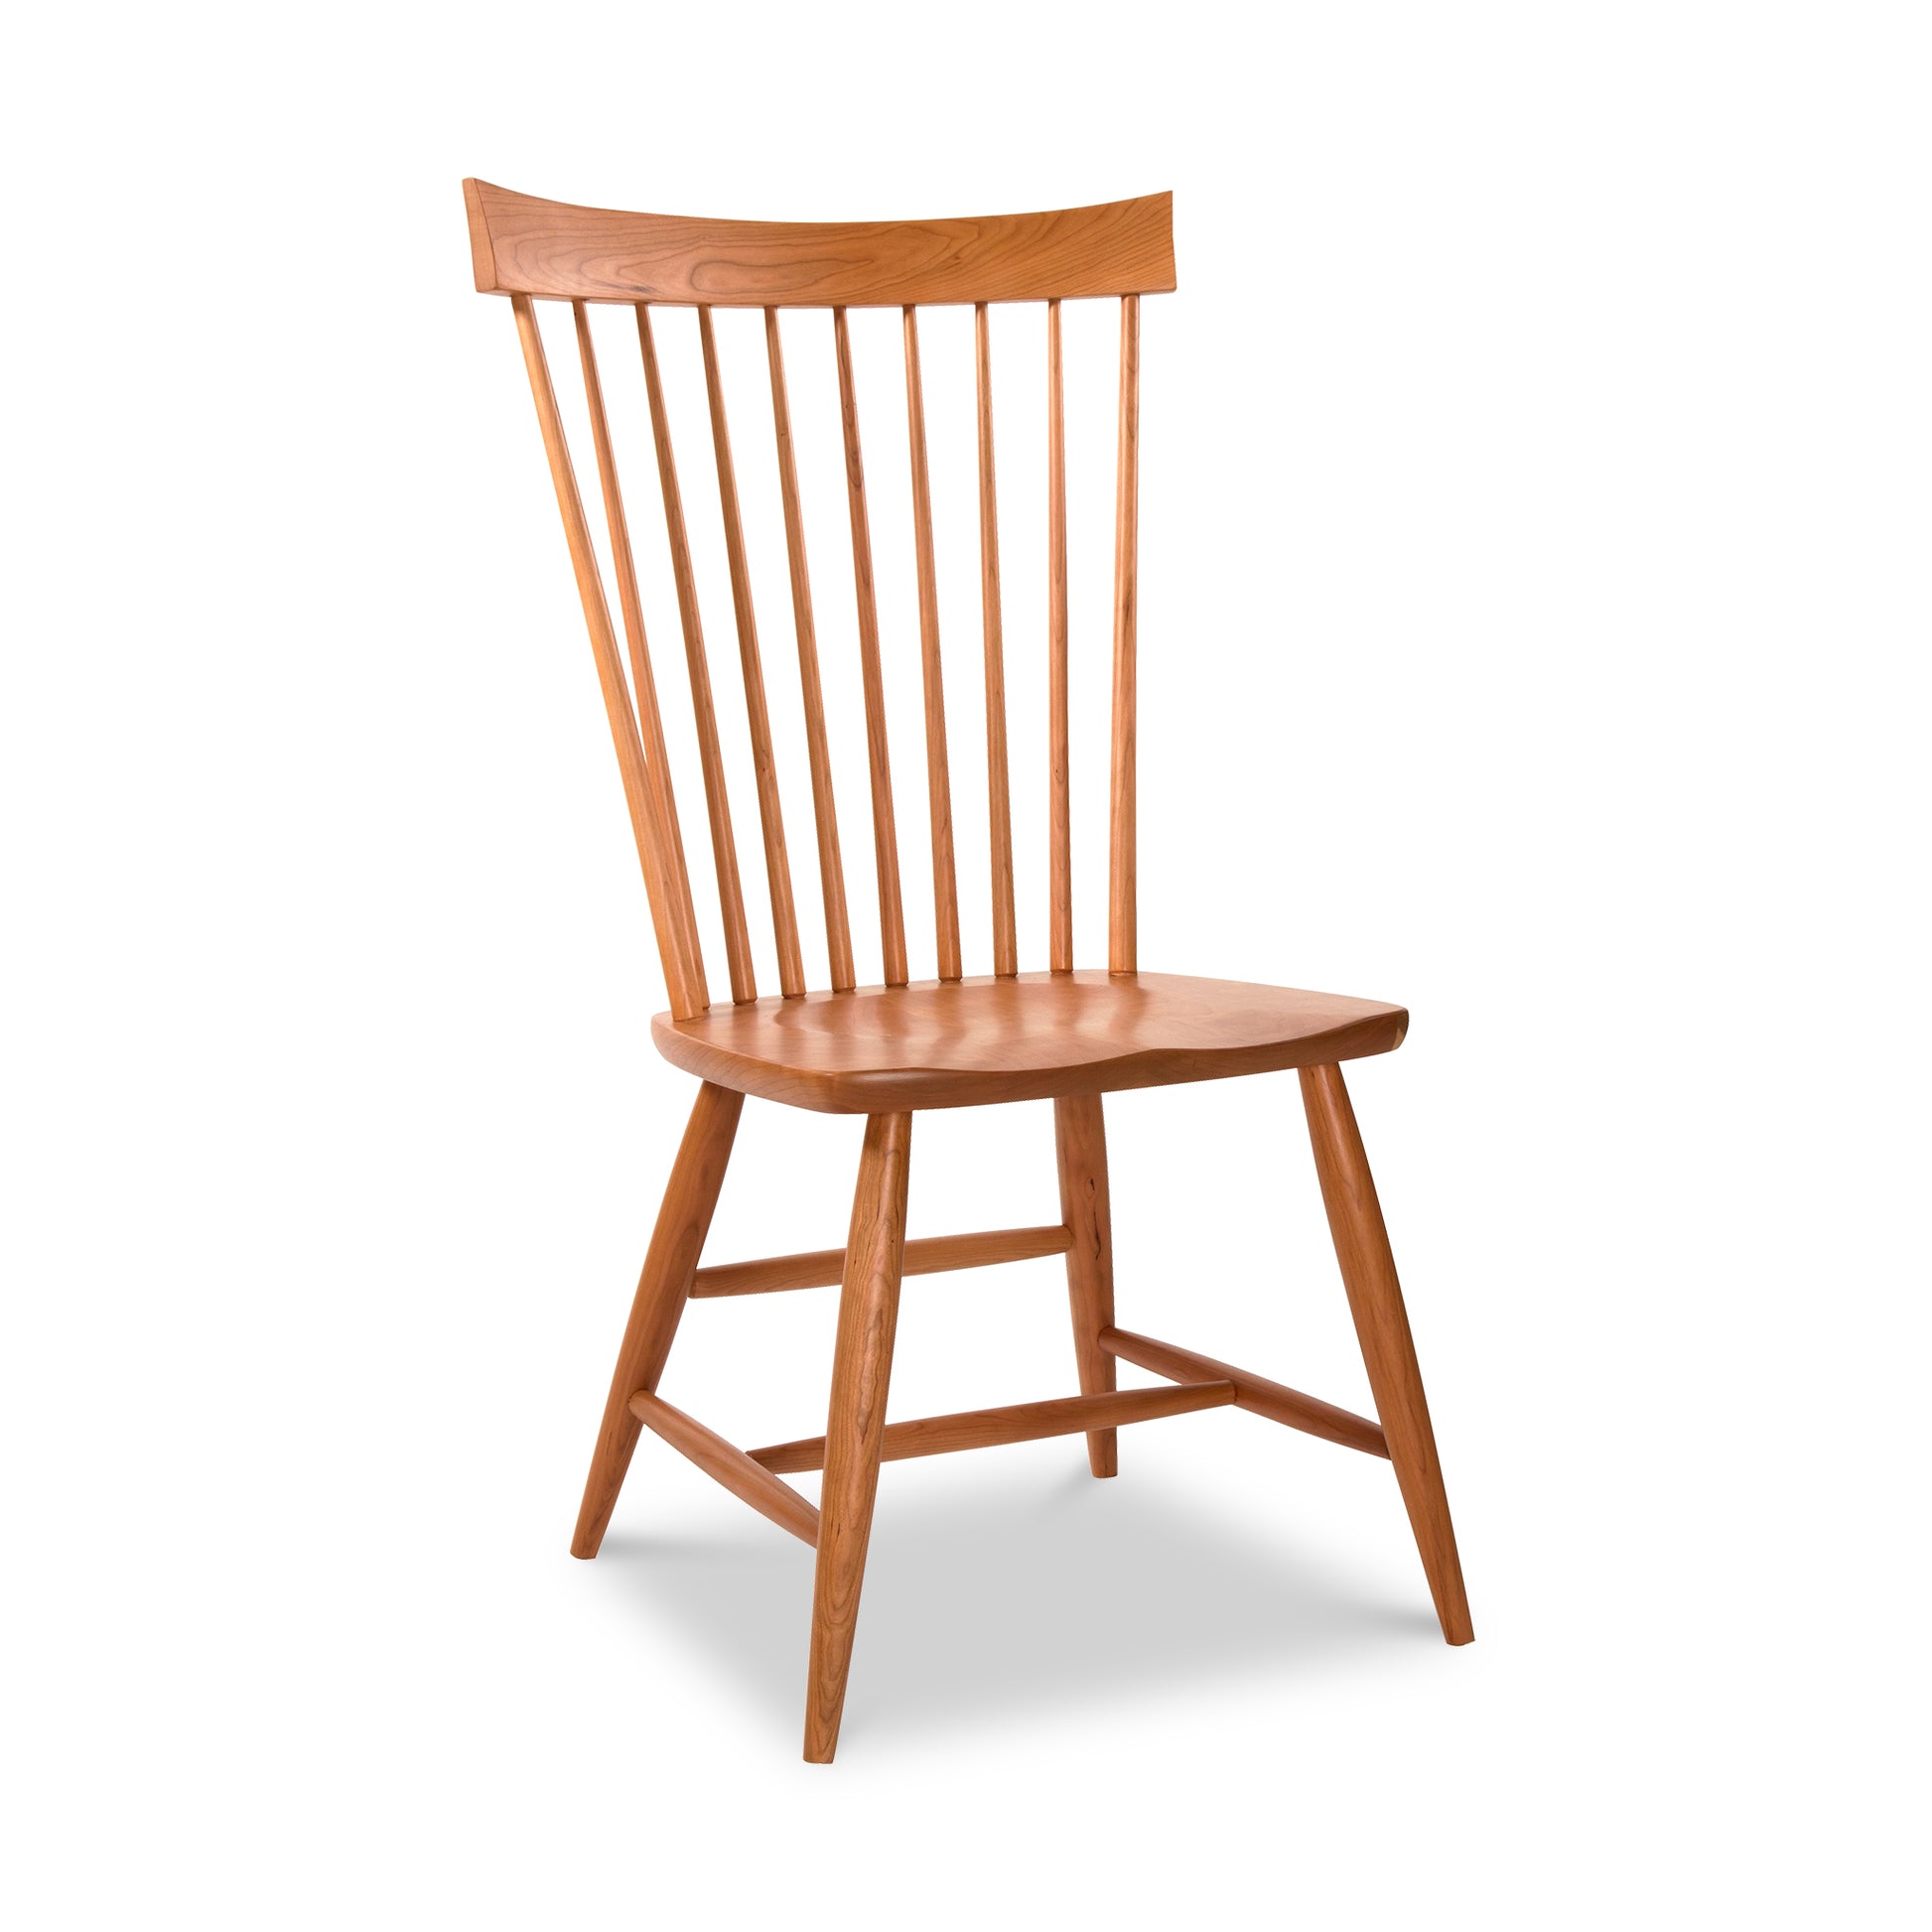 A wooden chair with a wooden seat.